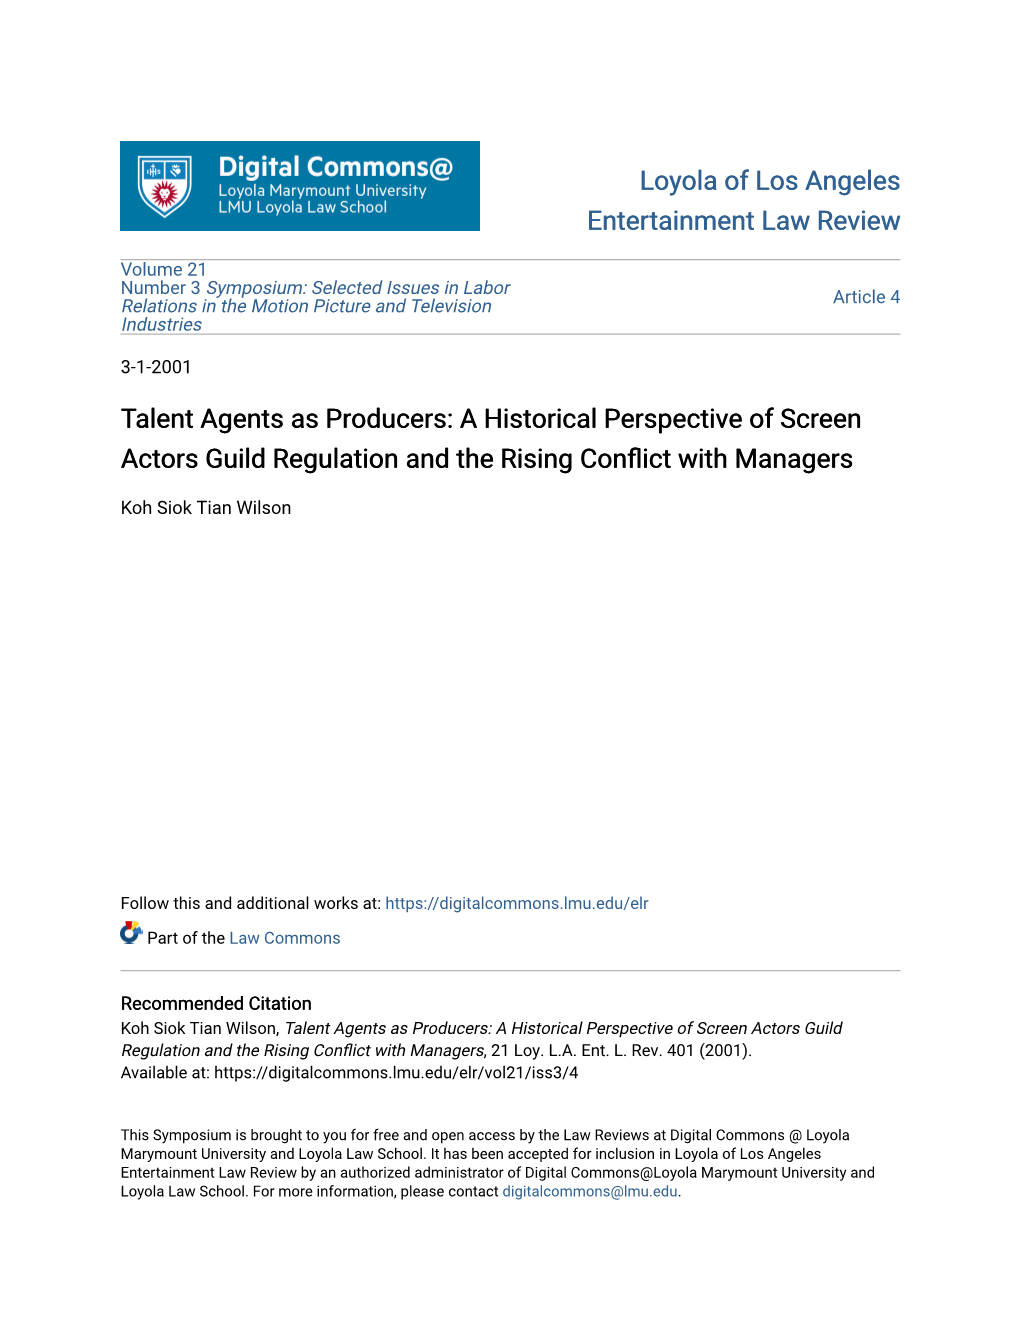 Talent Agents As Producers: a Historical Perspective of Screen Actors Guild Regulation and the Rising Conflict with Managers